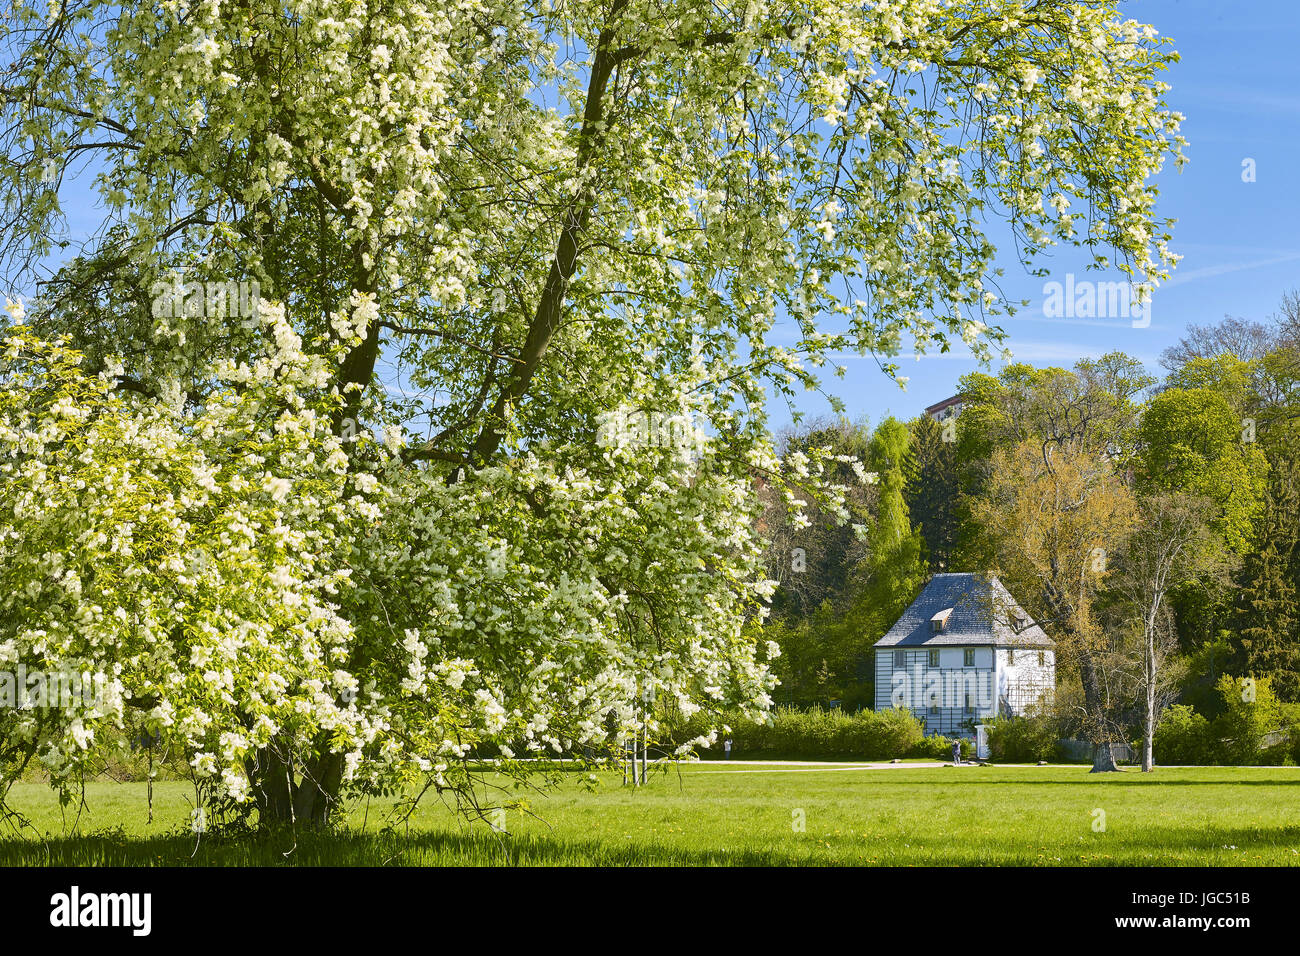 Goethe's garden house in the park on the Ilm, Weimar, Thuringia, Germany Stock Photo